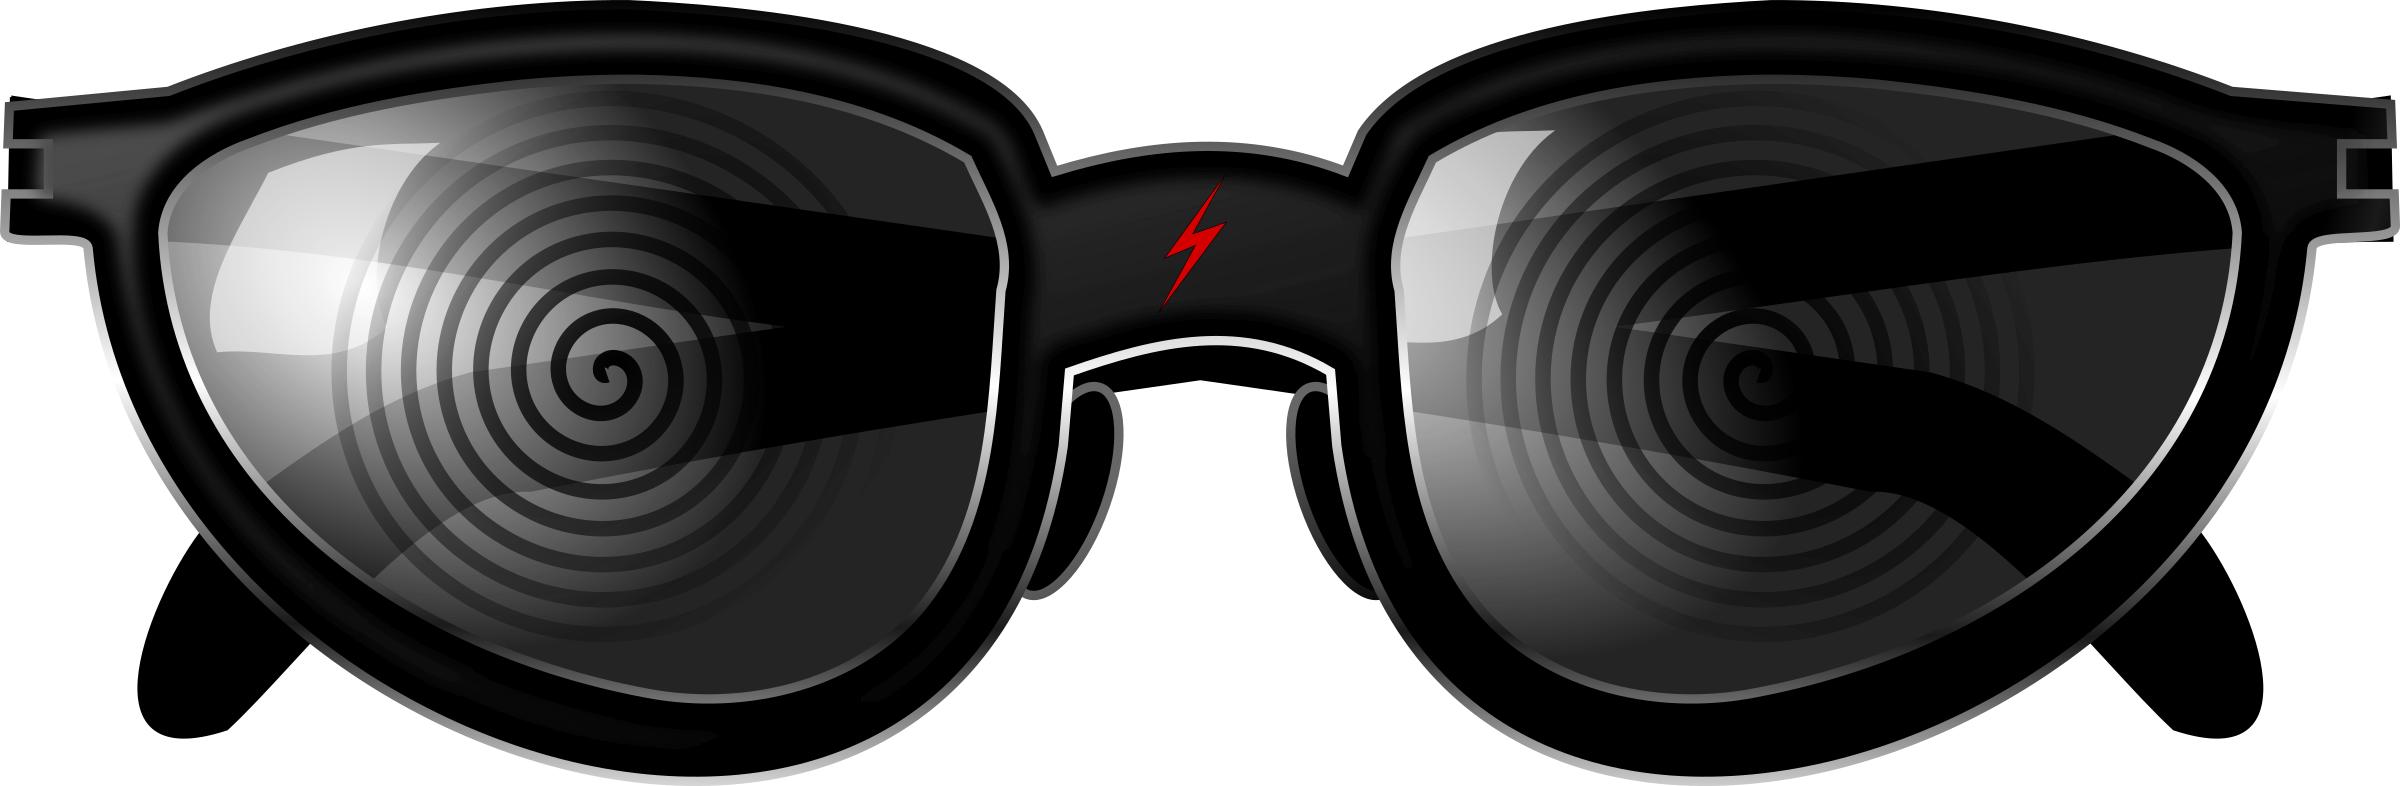 X-Ray Spex Specs Glasses png